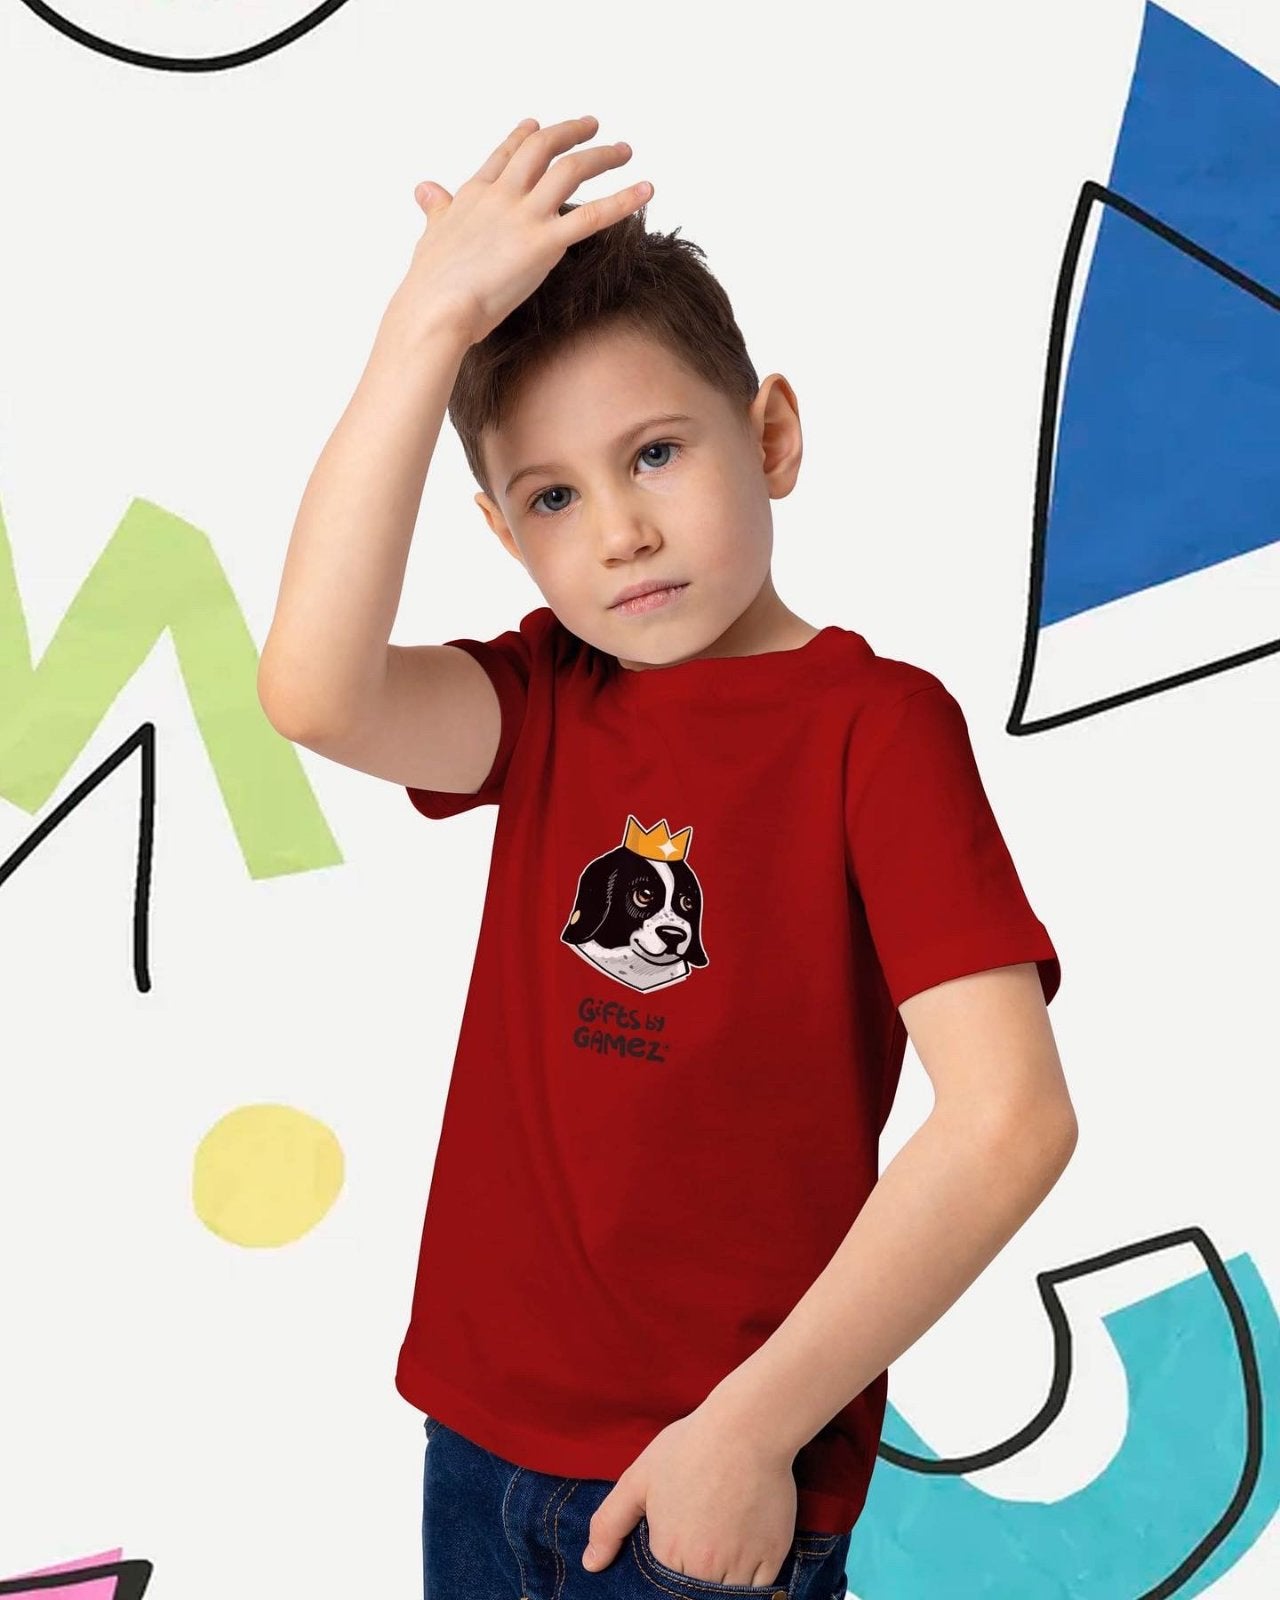 Children's t-shirt kupata of different colors